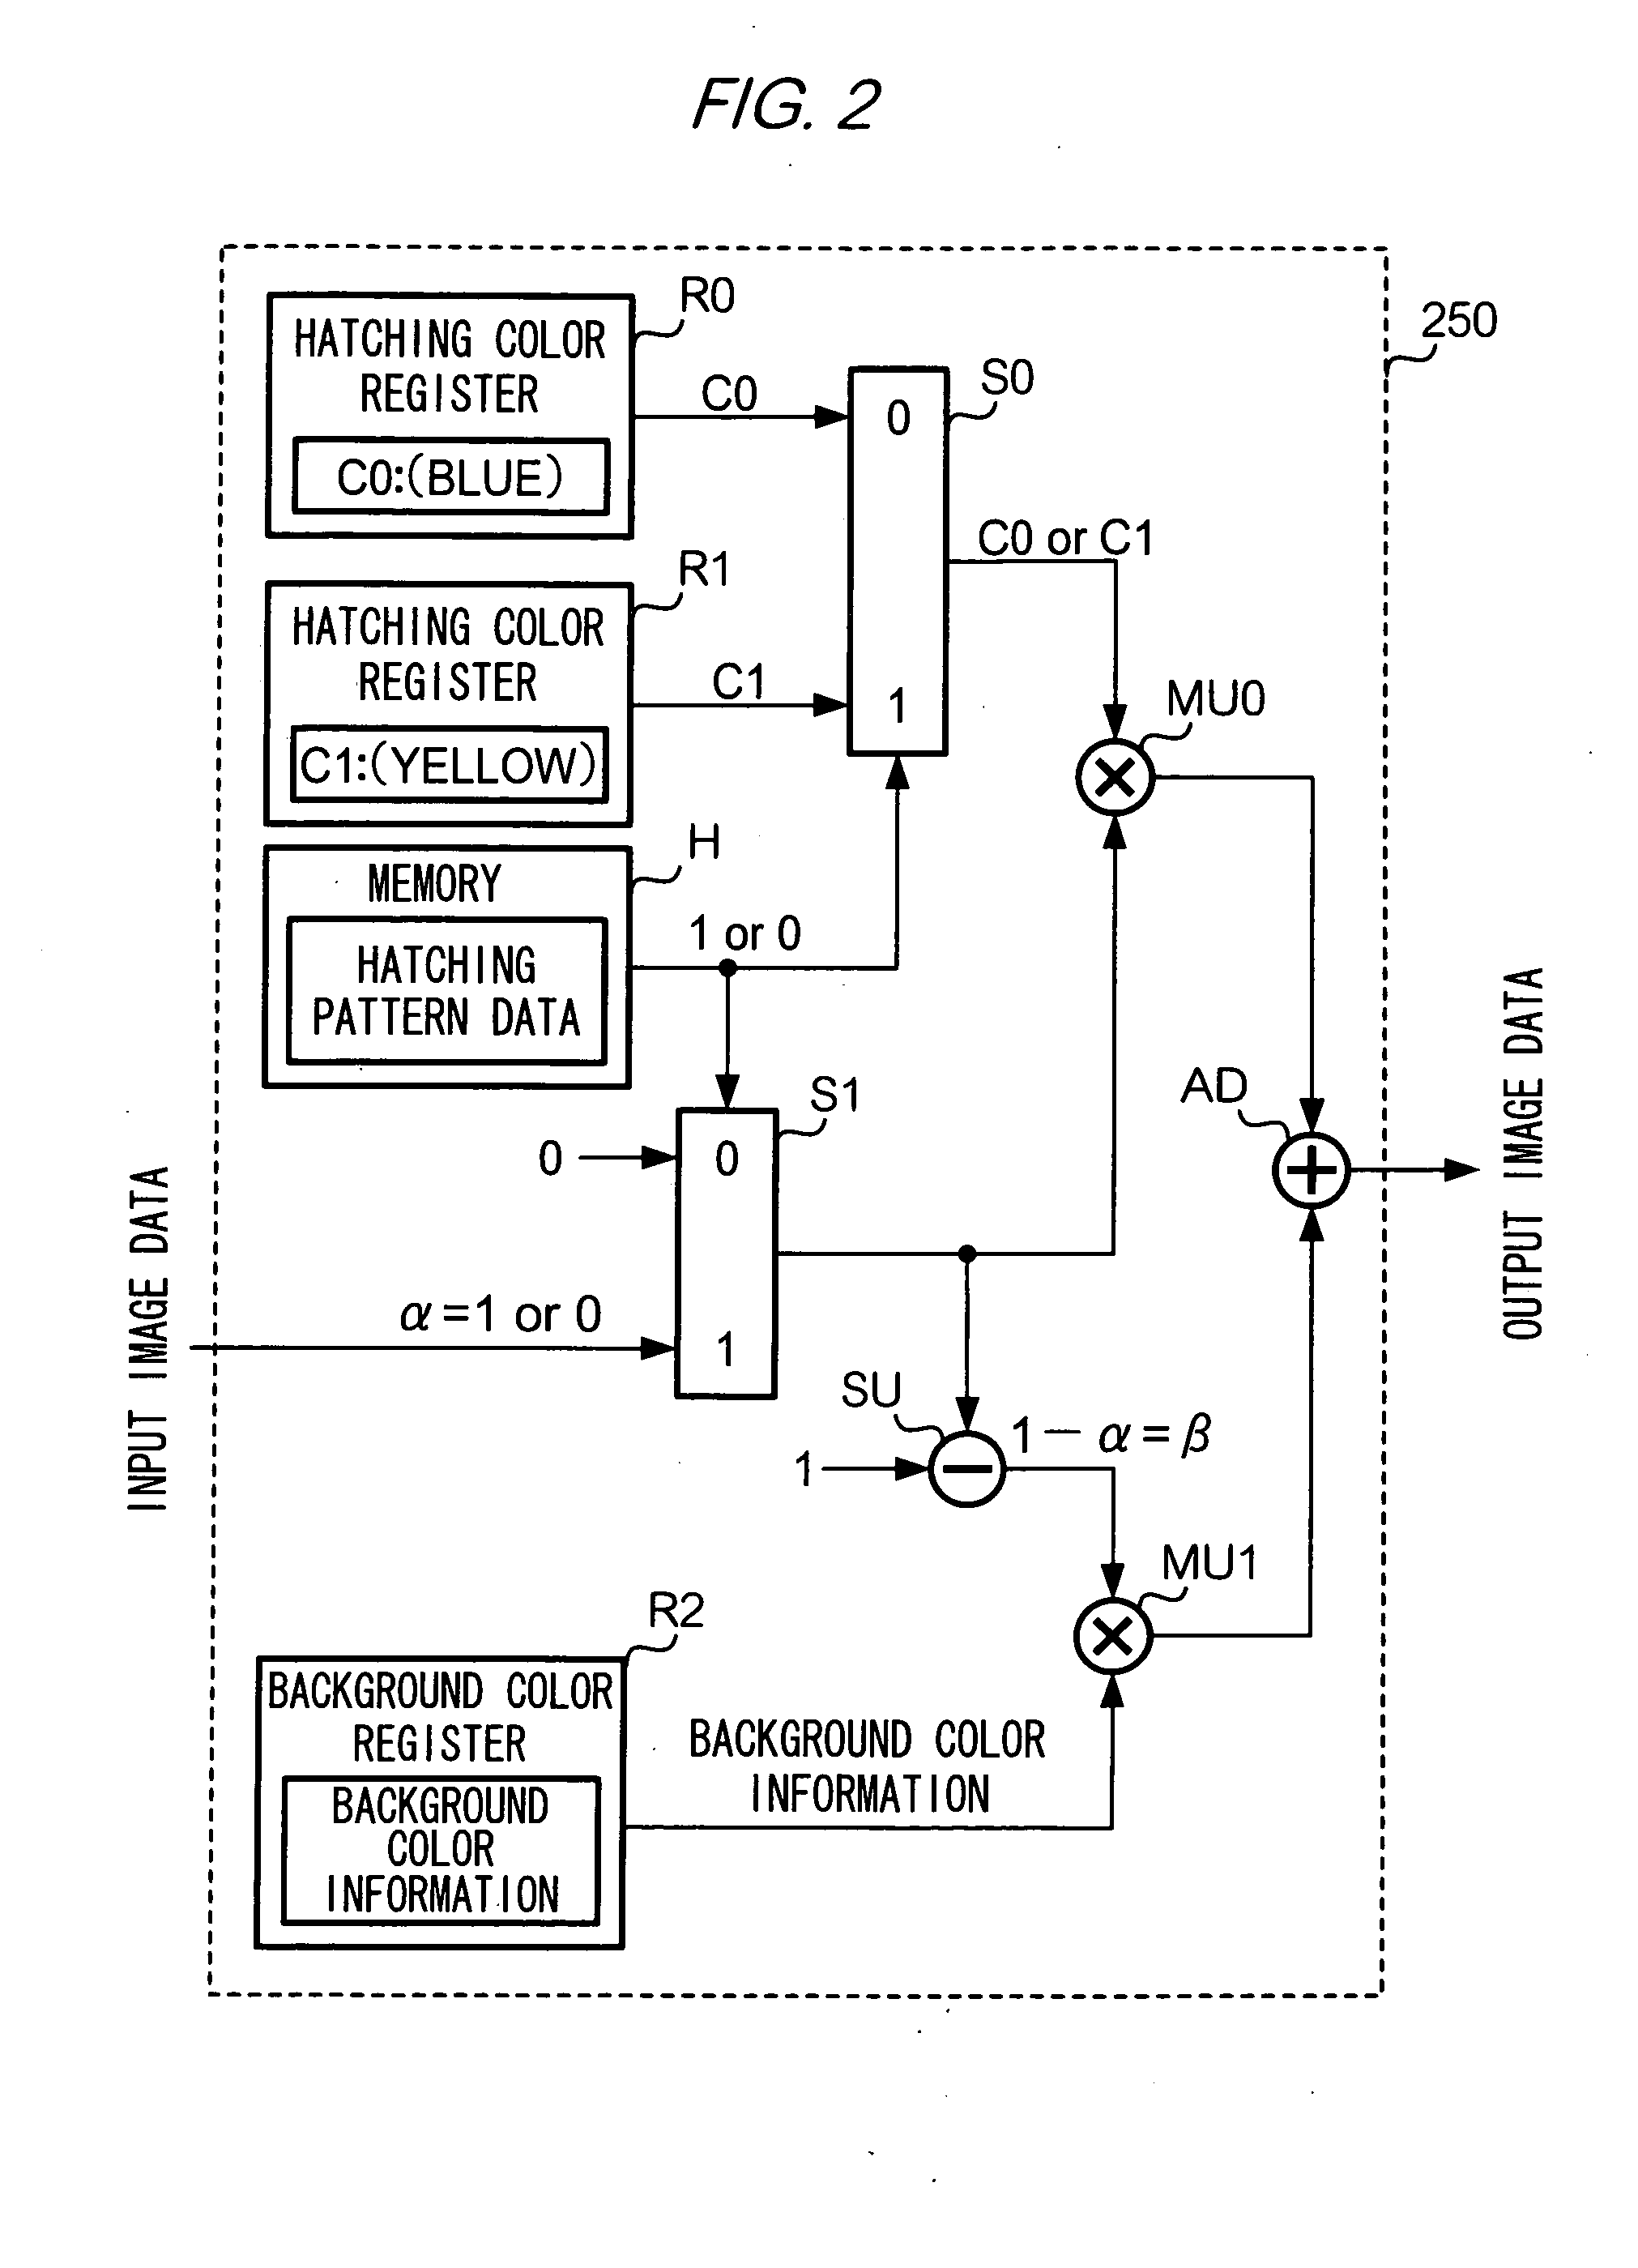 Image processing circuit, display device, and printing device